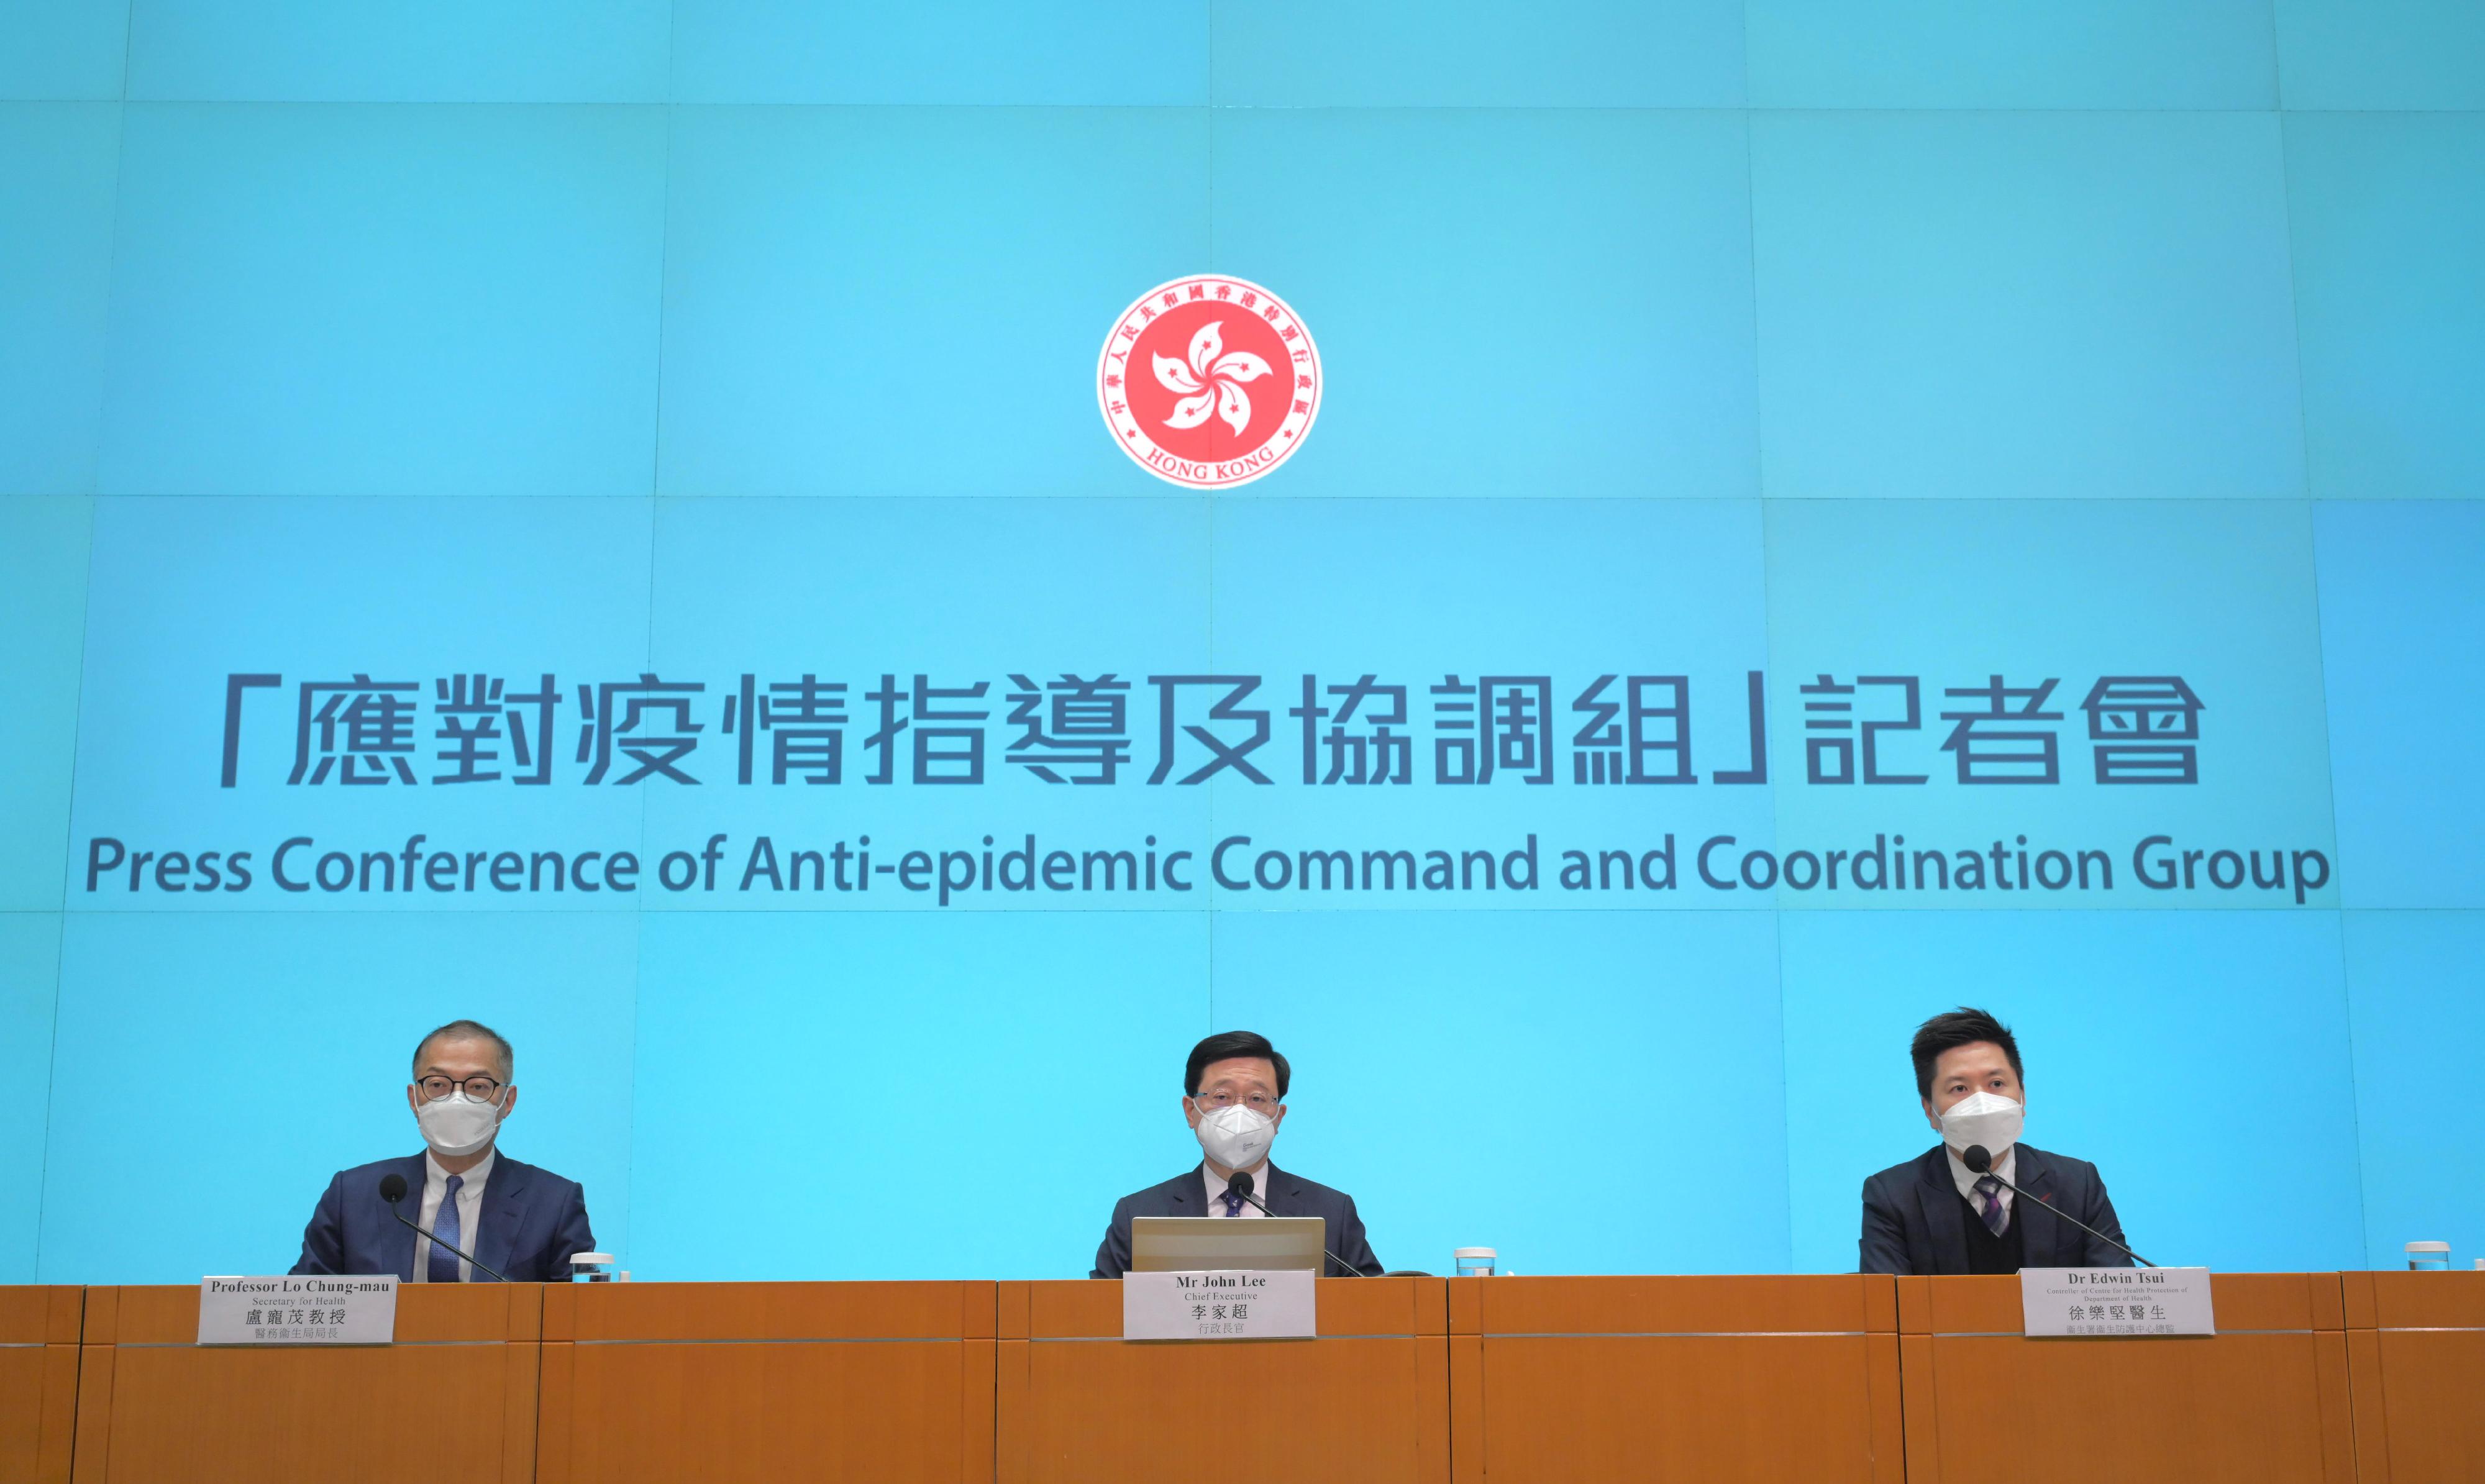 The Chief Executive, Mr John Lee (centre), holds a Command and Coordination Group press conference with the Secretary for Health, Professor Lo Chung-mau (left), and the Controller of the Centre for Health Protection of the Department of Health, Dr Edwin Tsui (right), at the Central Government Offices, Tamar, today (December 28).